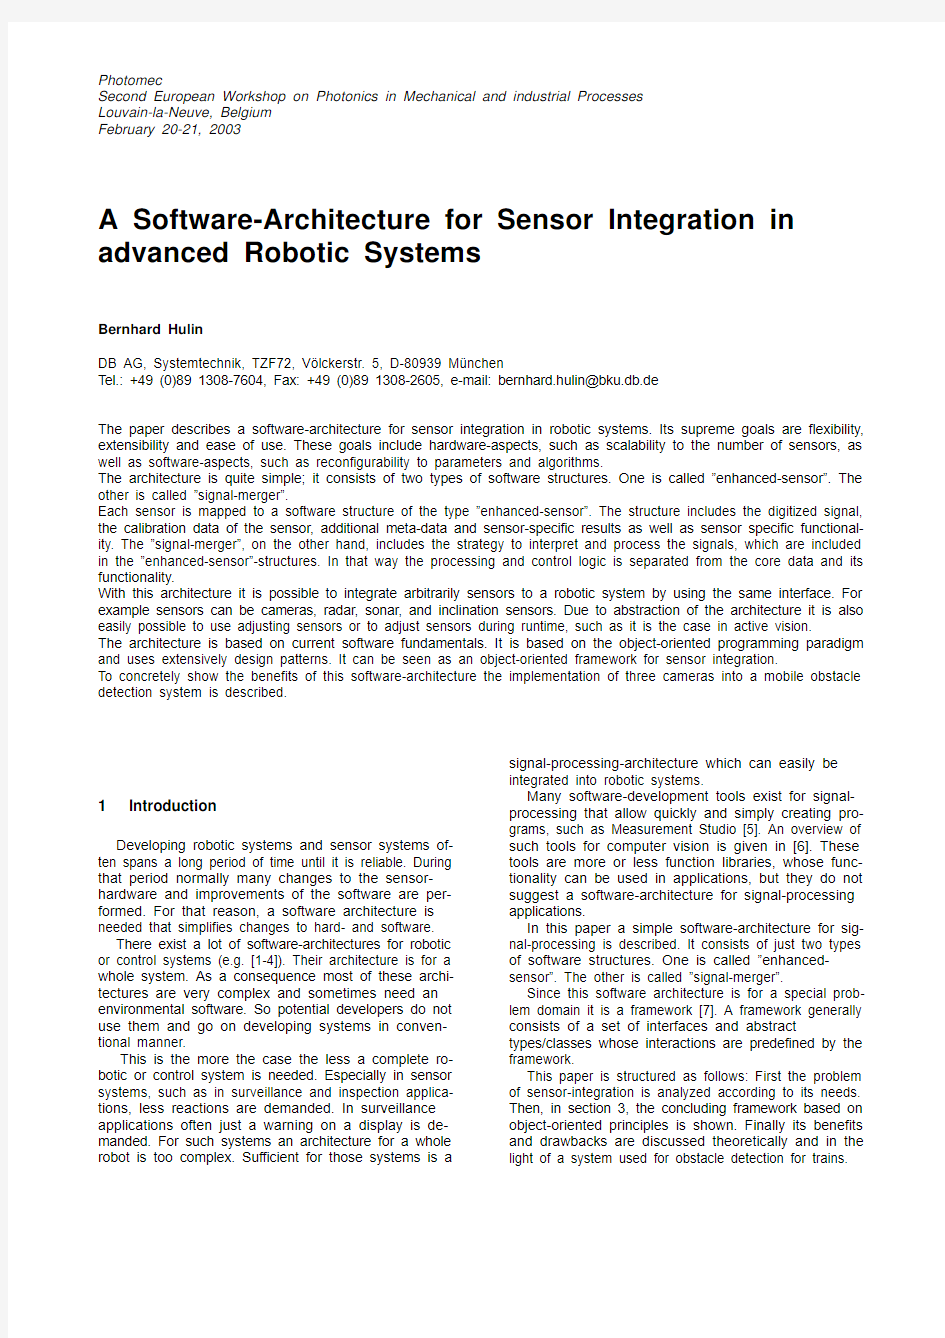 A Software-Architecture for Sensor Integration in advanced Robotic Systems